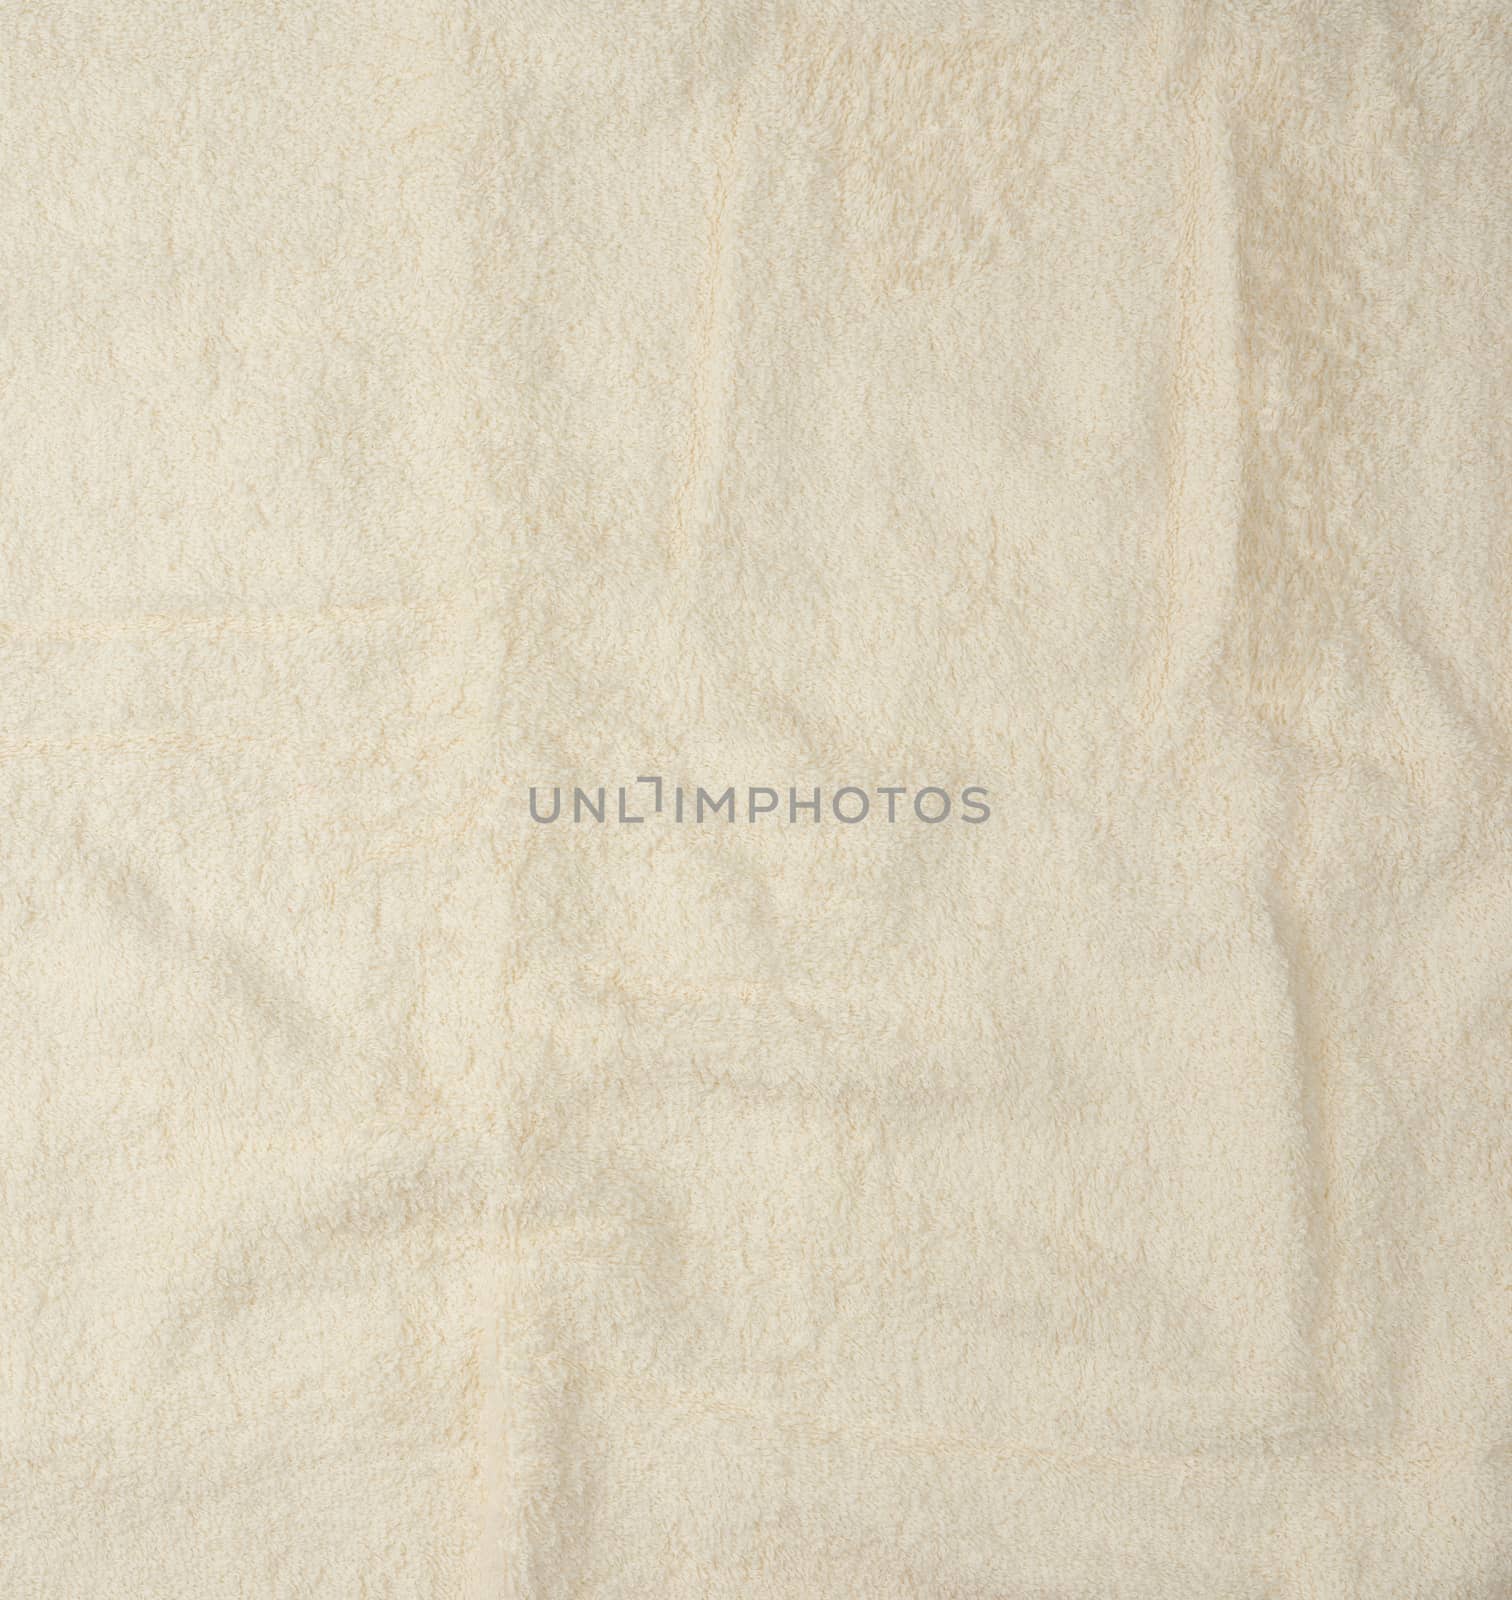 texture of new fleecy white towels, full frame, close up